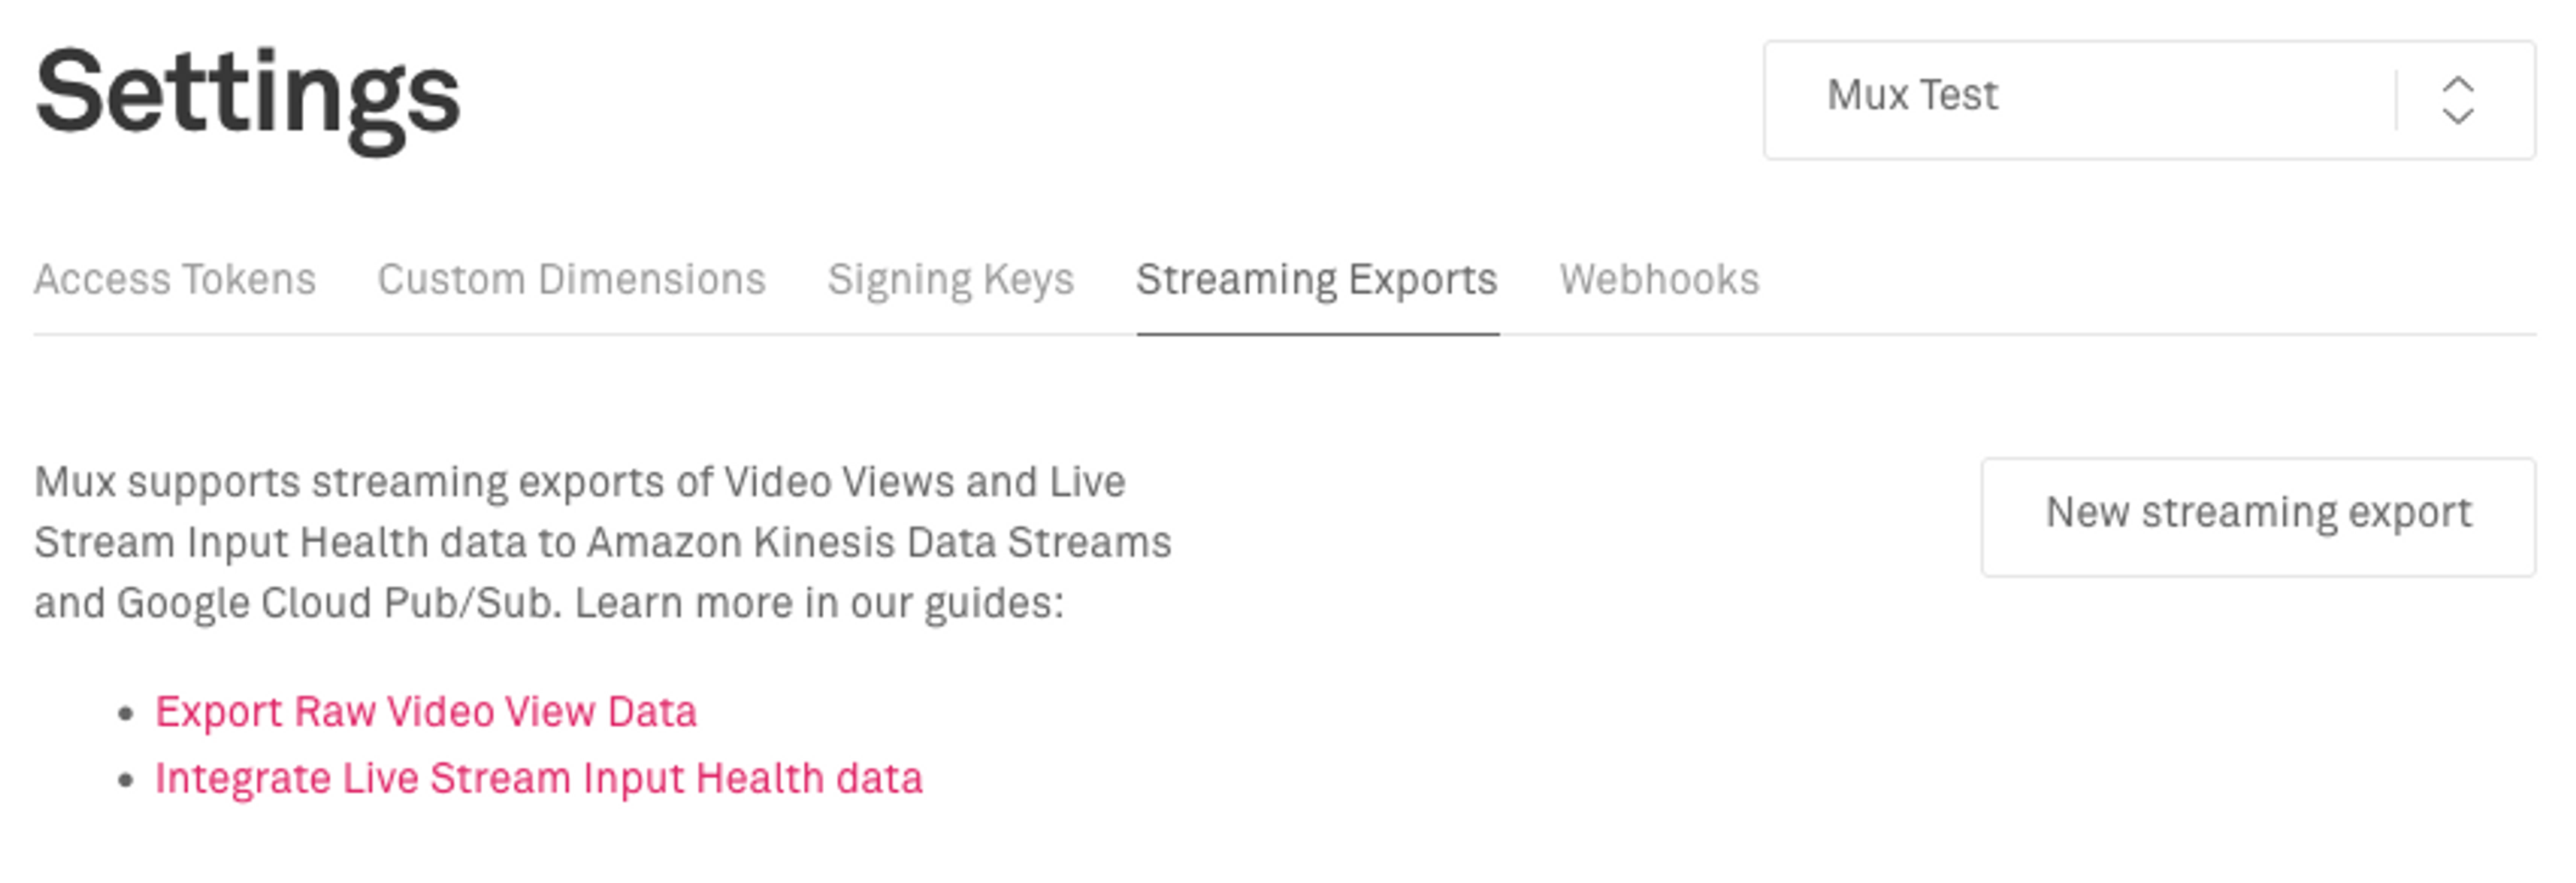 An image of streaming exports in settings 